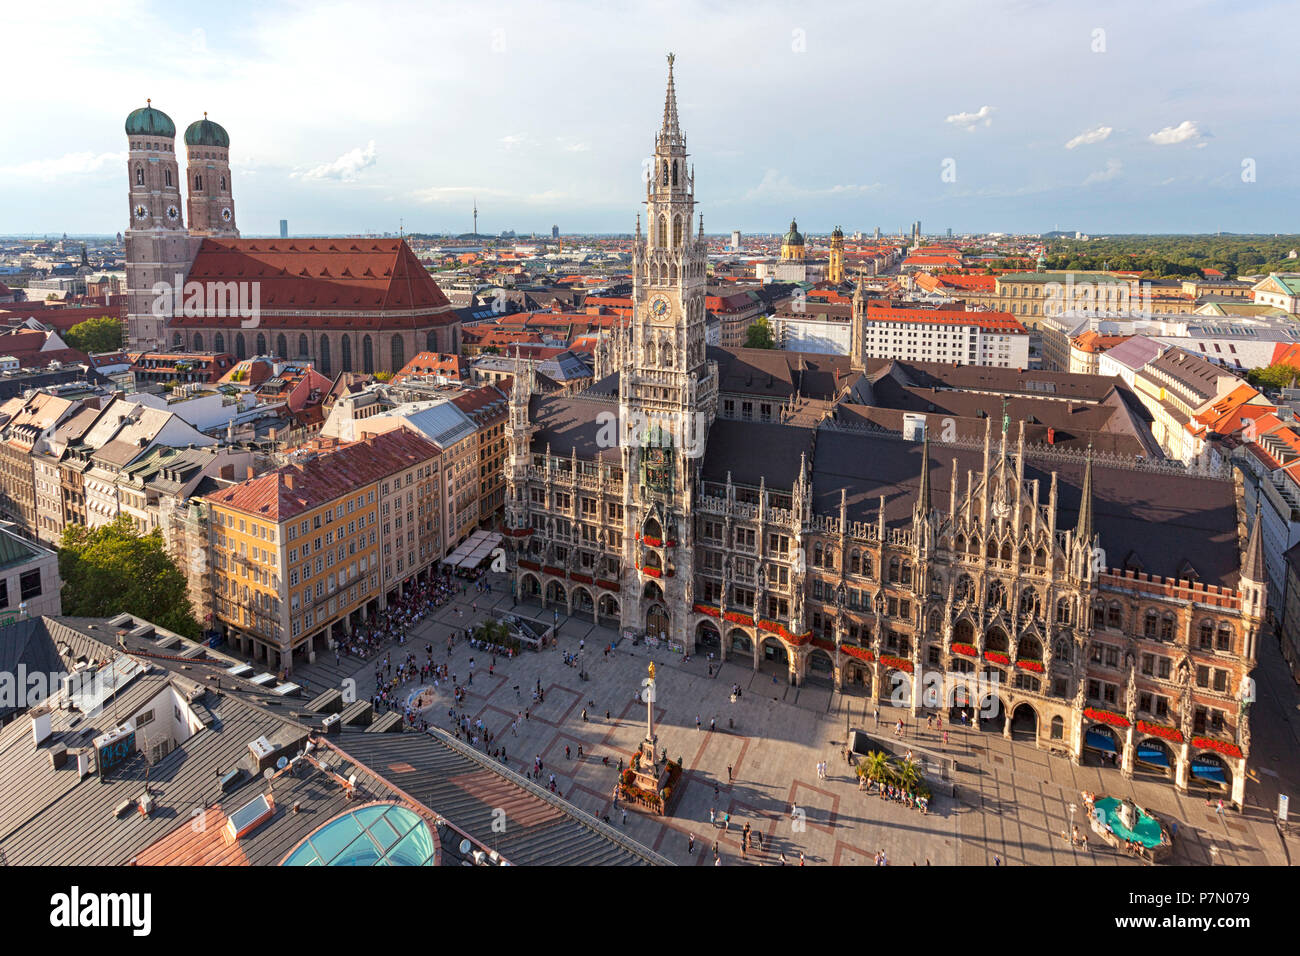 Overview of Town Hall, Rathaus, and Frauenkirche from St. Peter bell tower, Marienplatz, Munich, Bavaria, Germany, Stock Photo